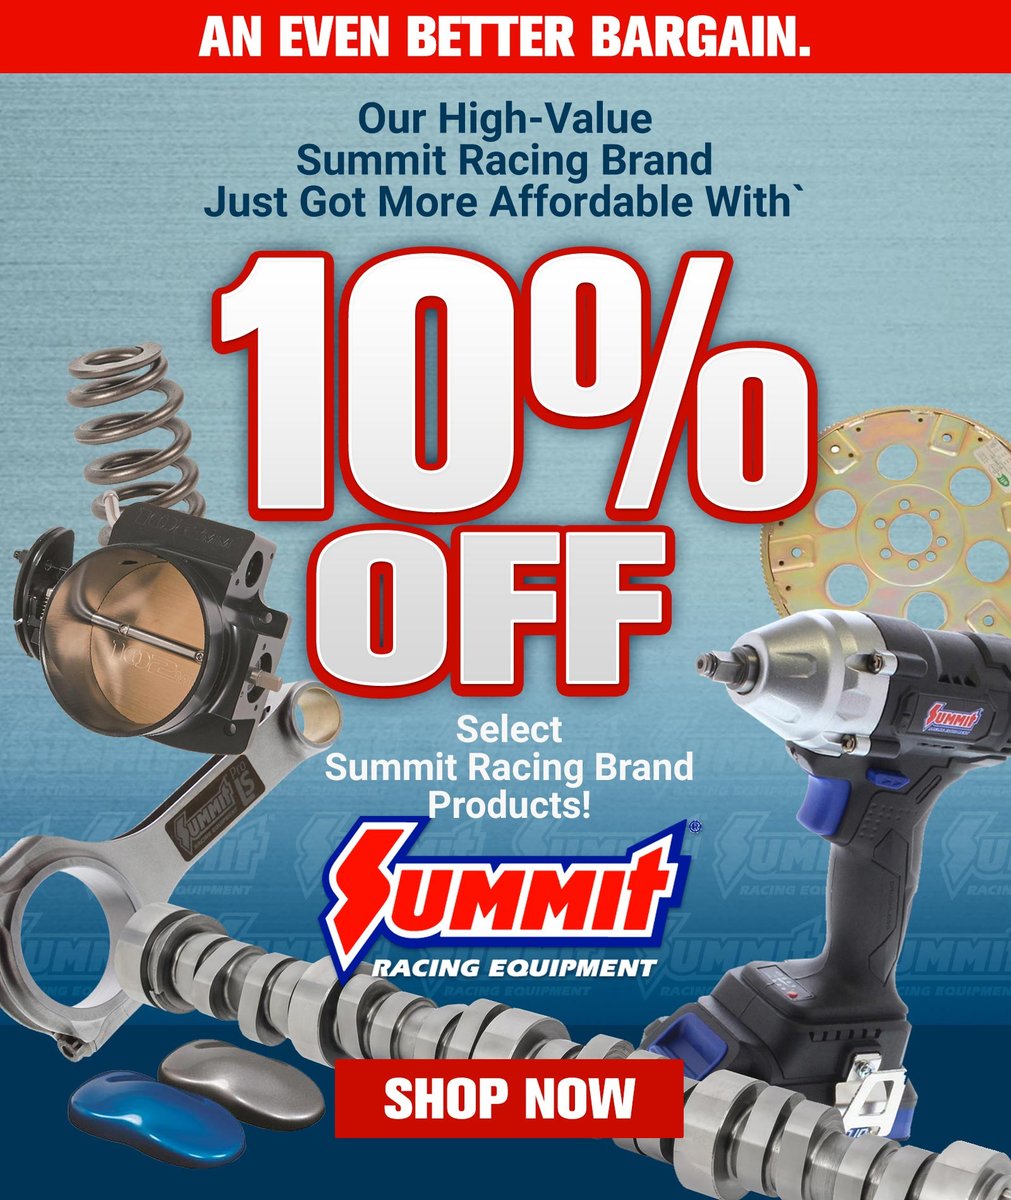 Get 10% off select @summitracing Brand products! Shop now at summitracing.com/redirect?banne… Offer ends 5/5 at 11:59pm. #WKA #WorldKarting #WorldKartingAssociation #Karting #Kart #LetsGoKarting #MoreKarting #Racing #Motorsport #Community #Sponsor #SummitRacing #SummitRacingEquipment